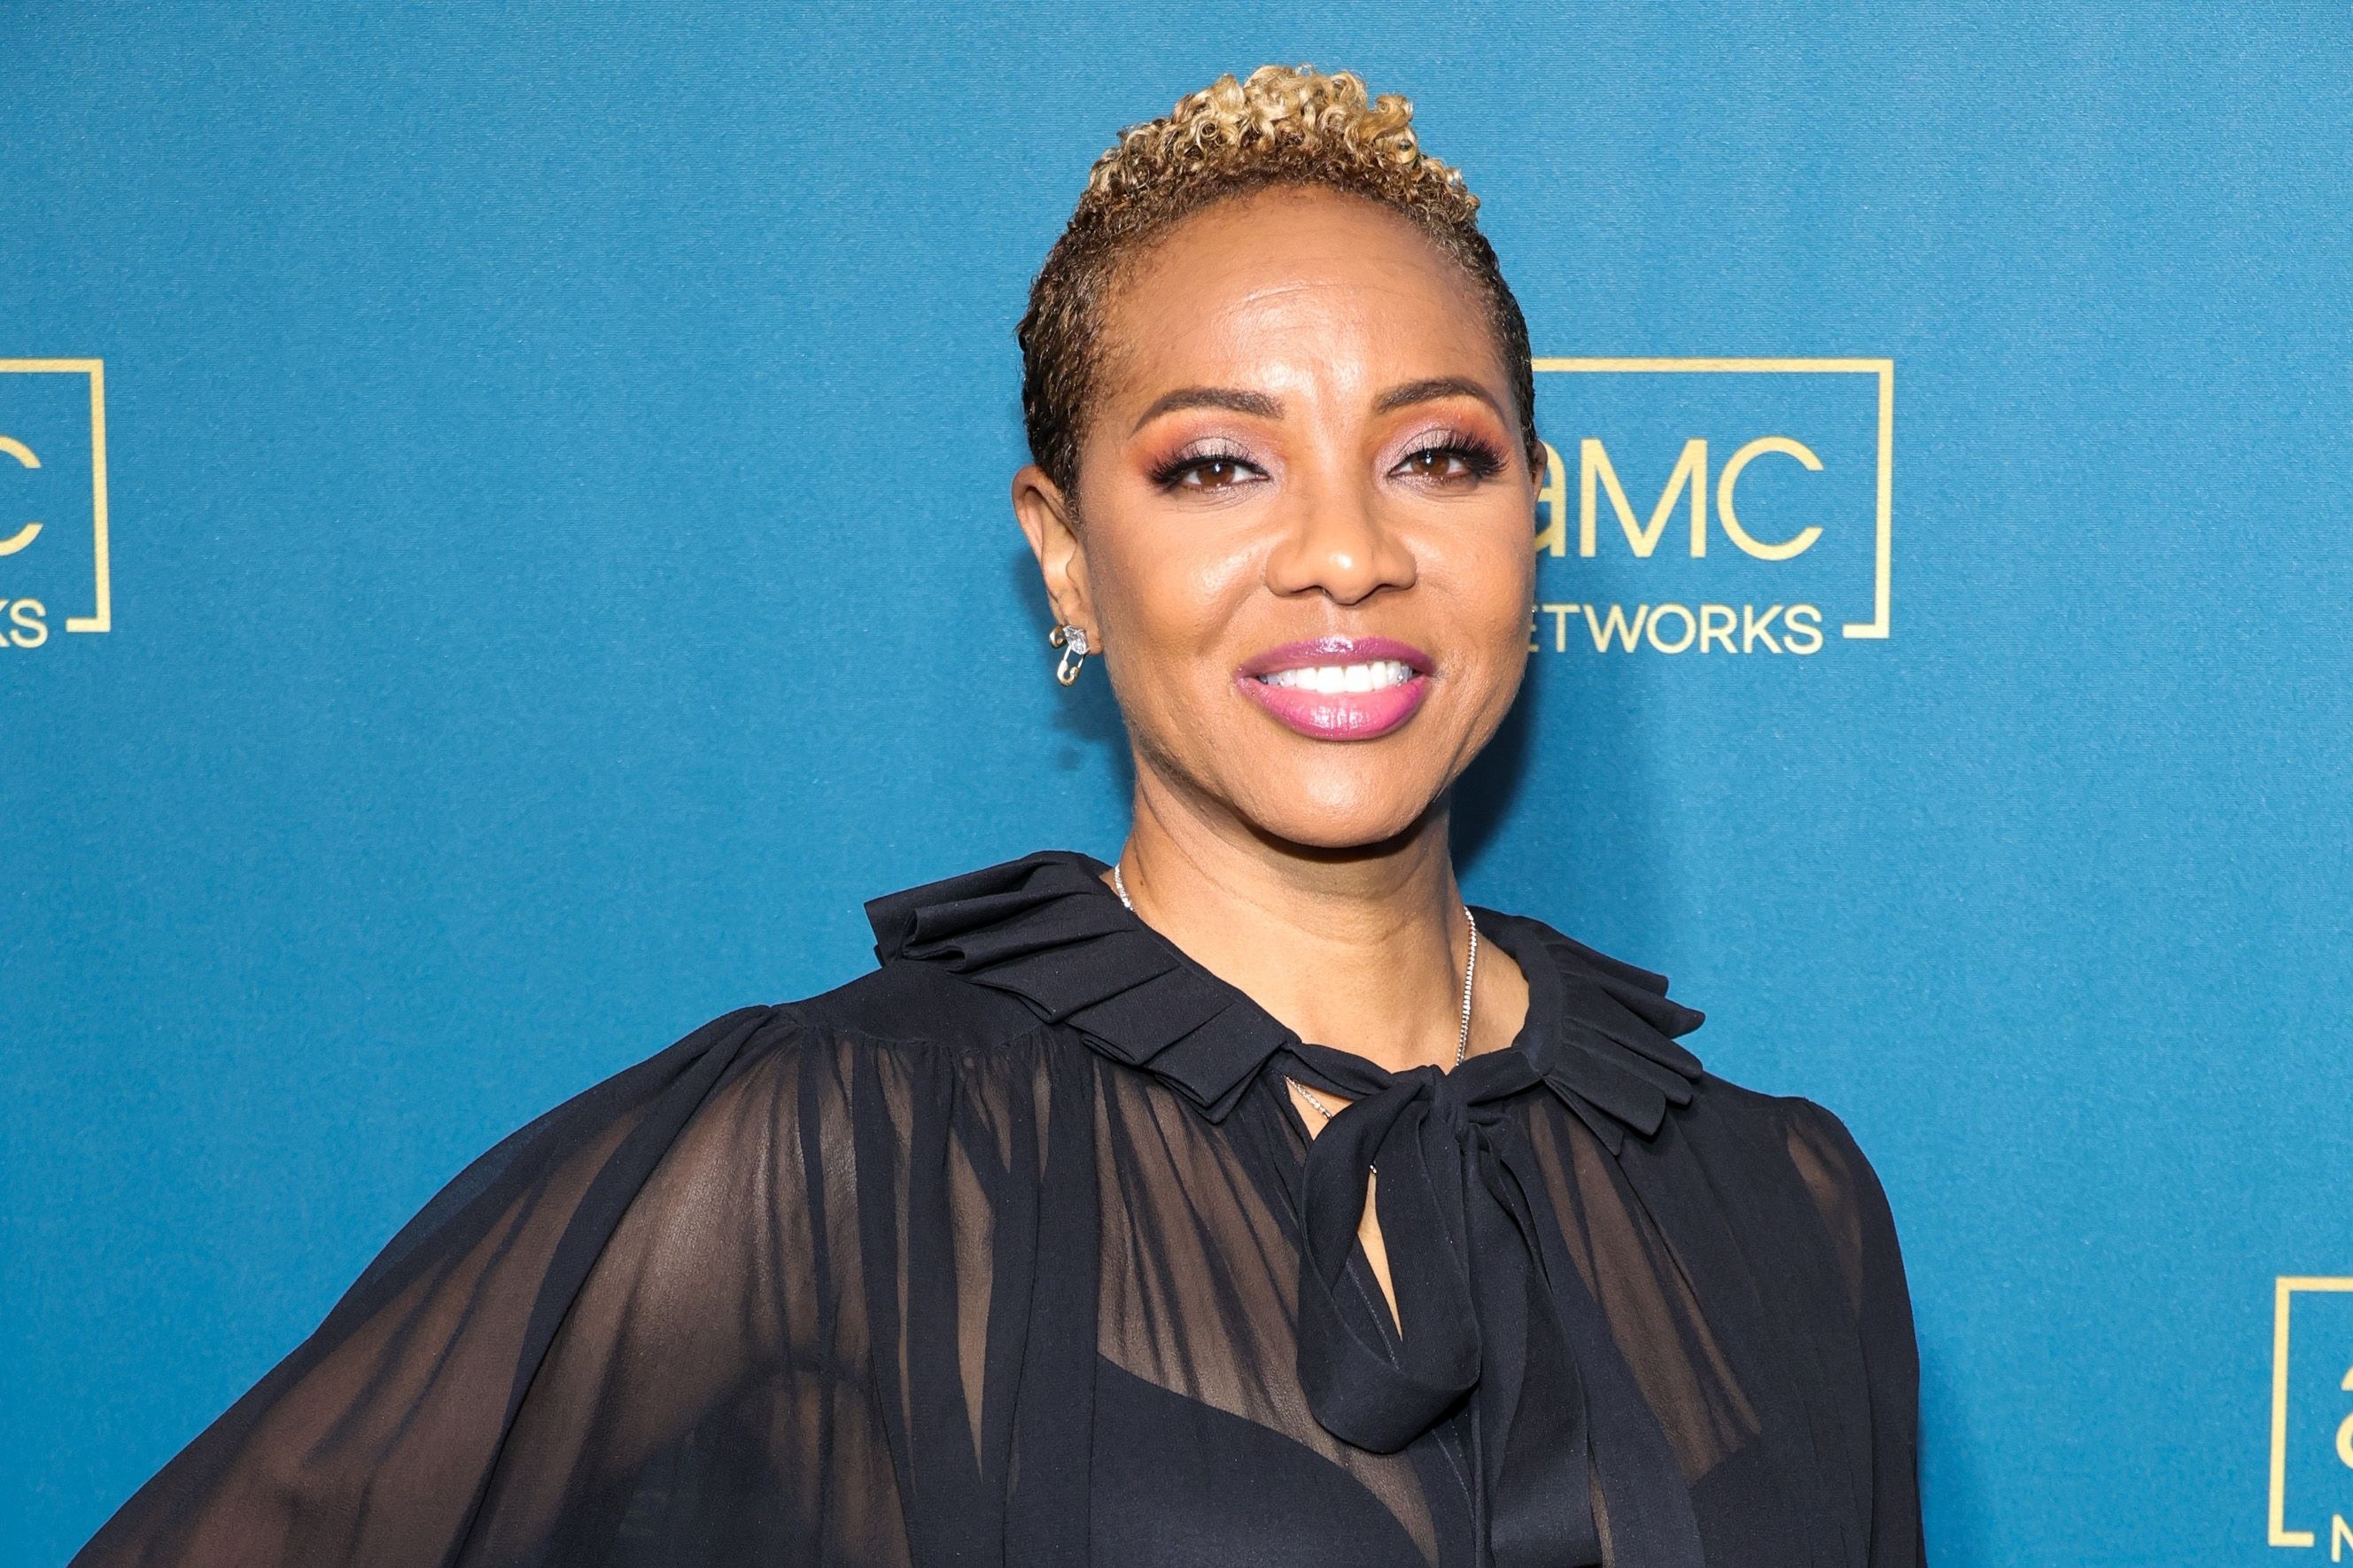 MC Lyte smiling at an event